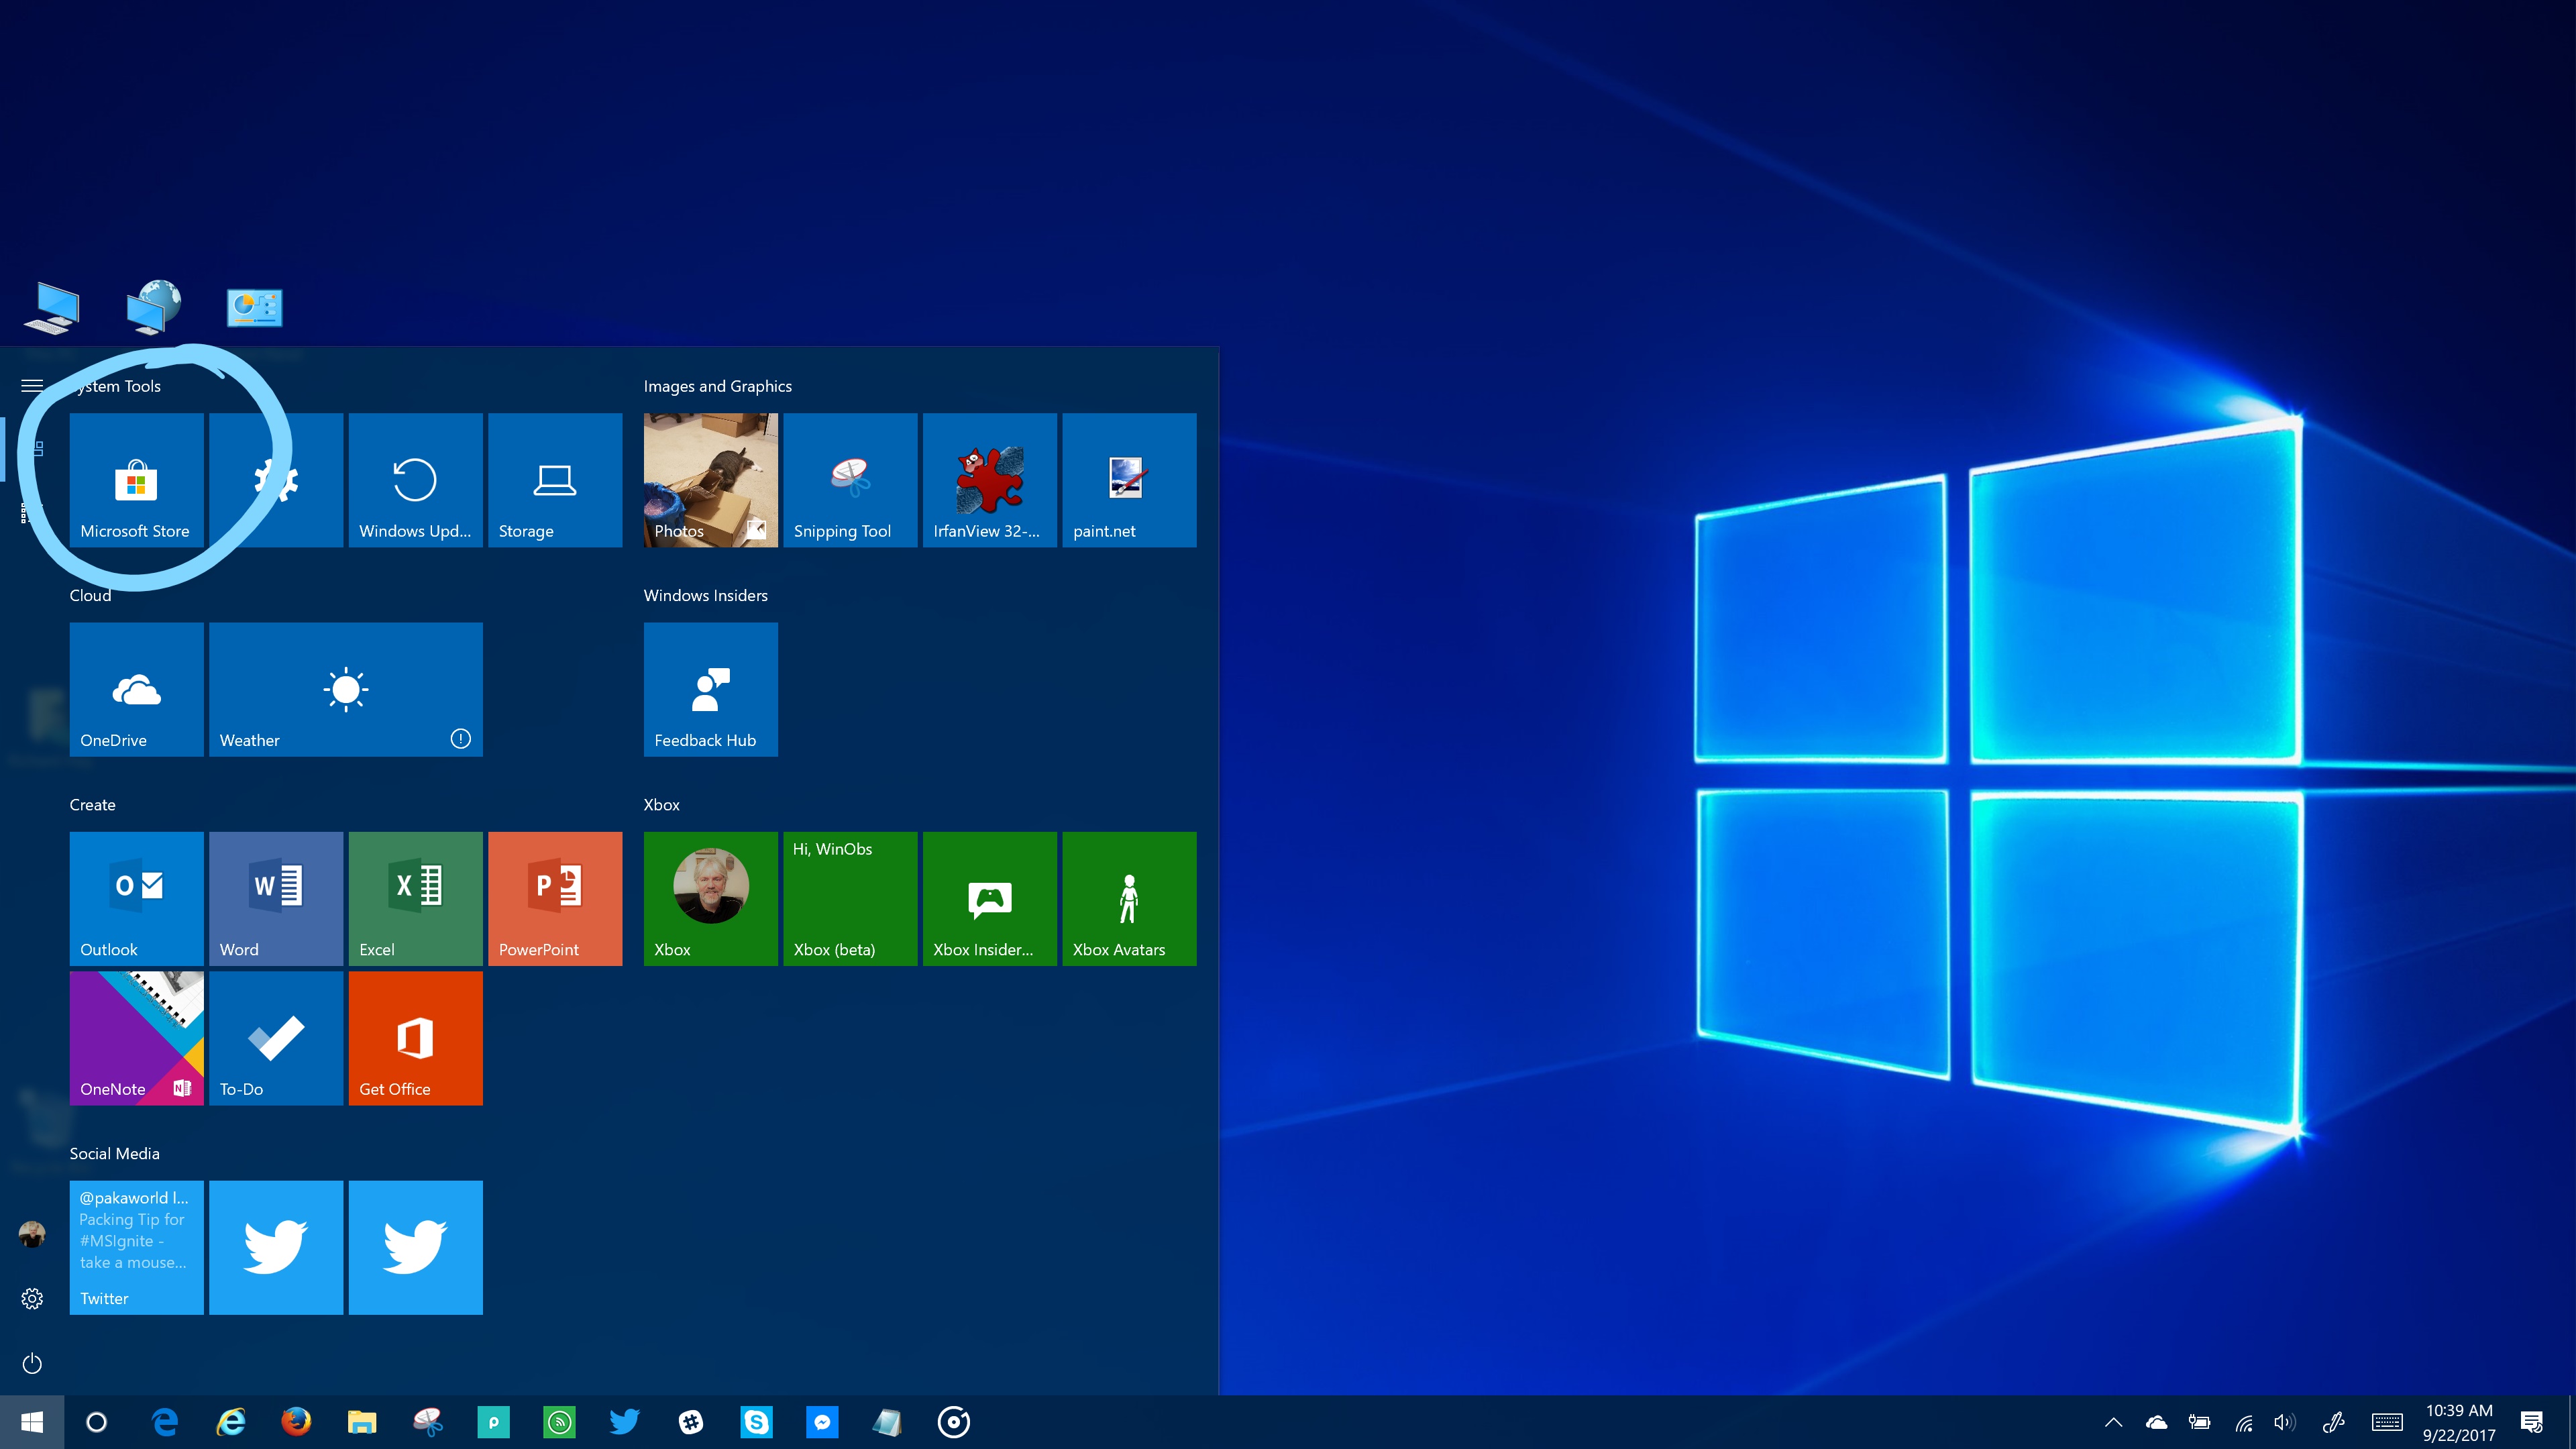 Microsoft Decides To Rebrand The Store In Windows 10 Itpro Today It